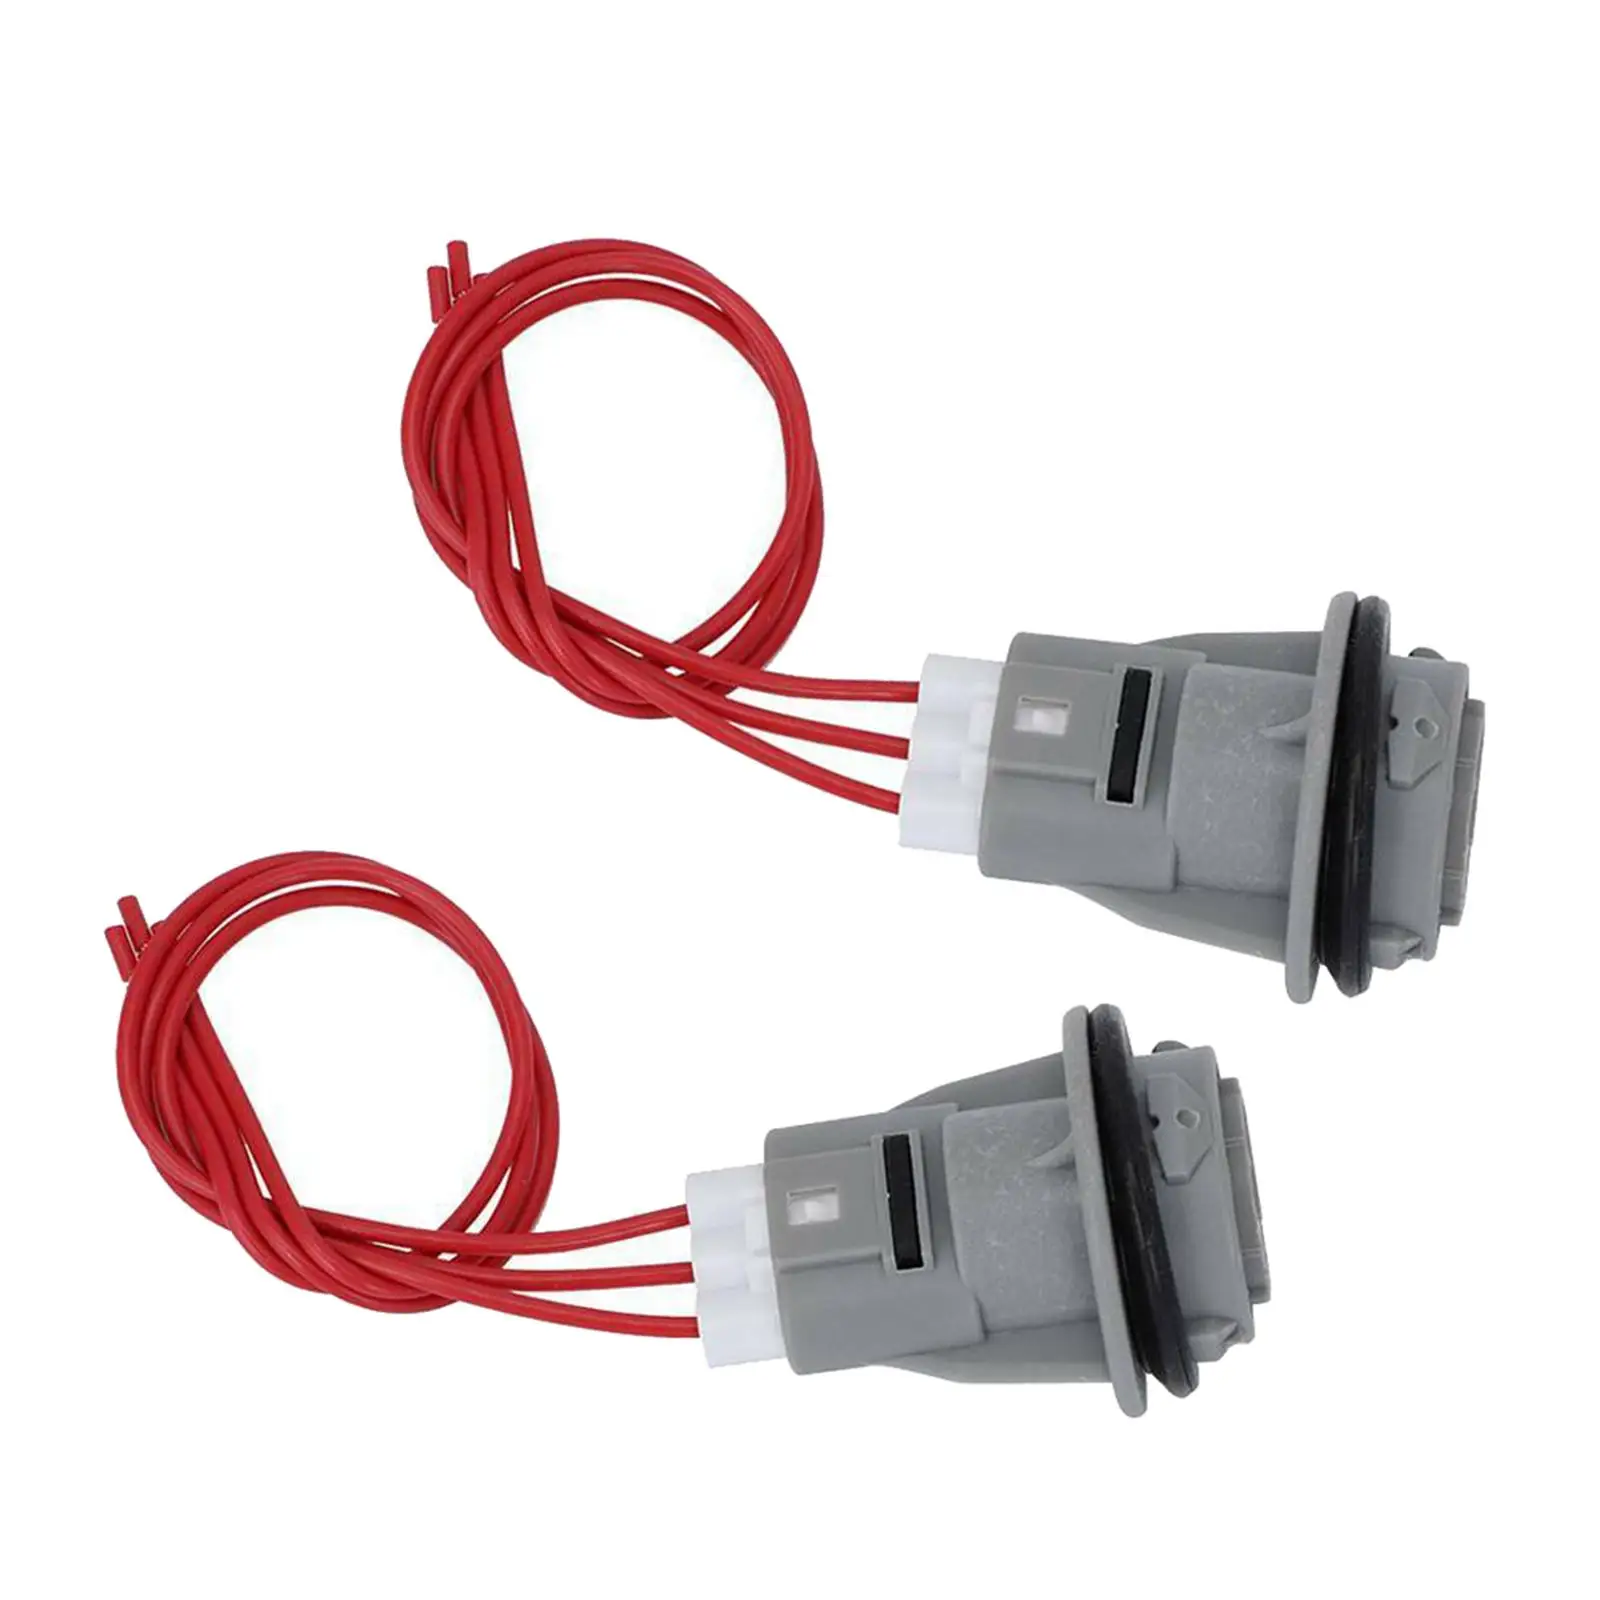 2 Blinker Connector Harness, 33302-St7- Set 33302--A01 x33302--A01 Fits Accord.